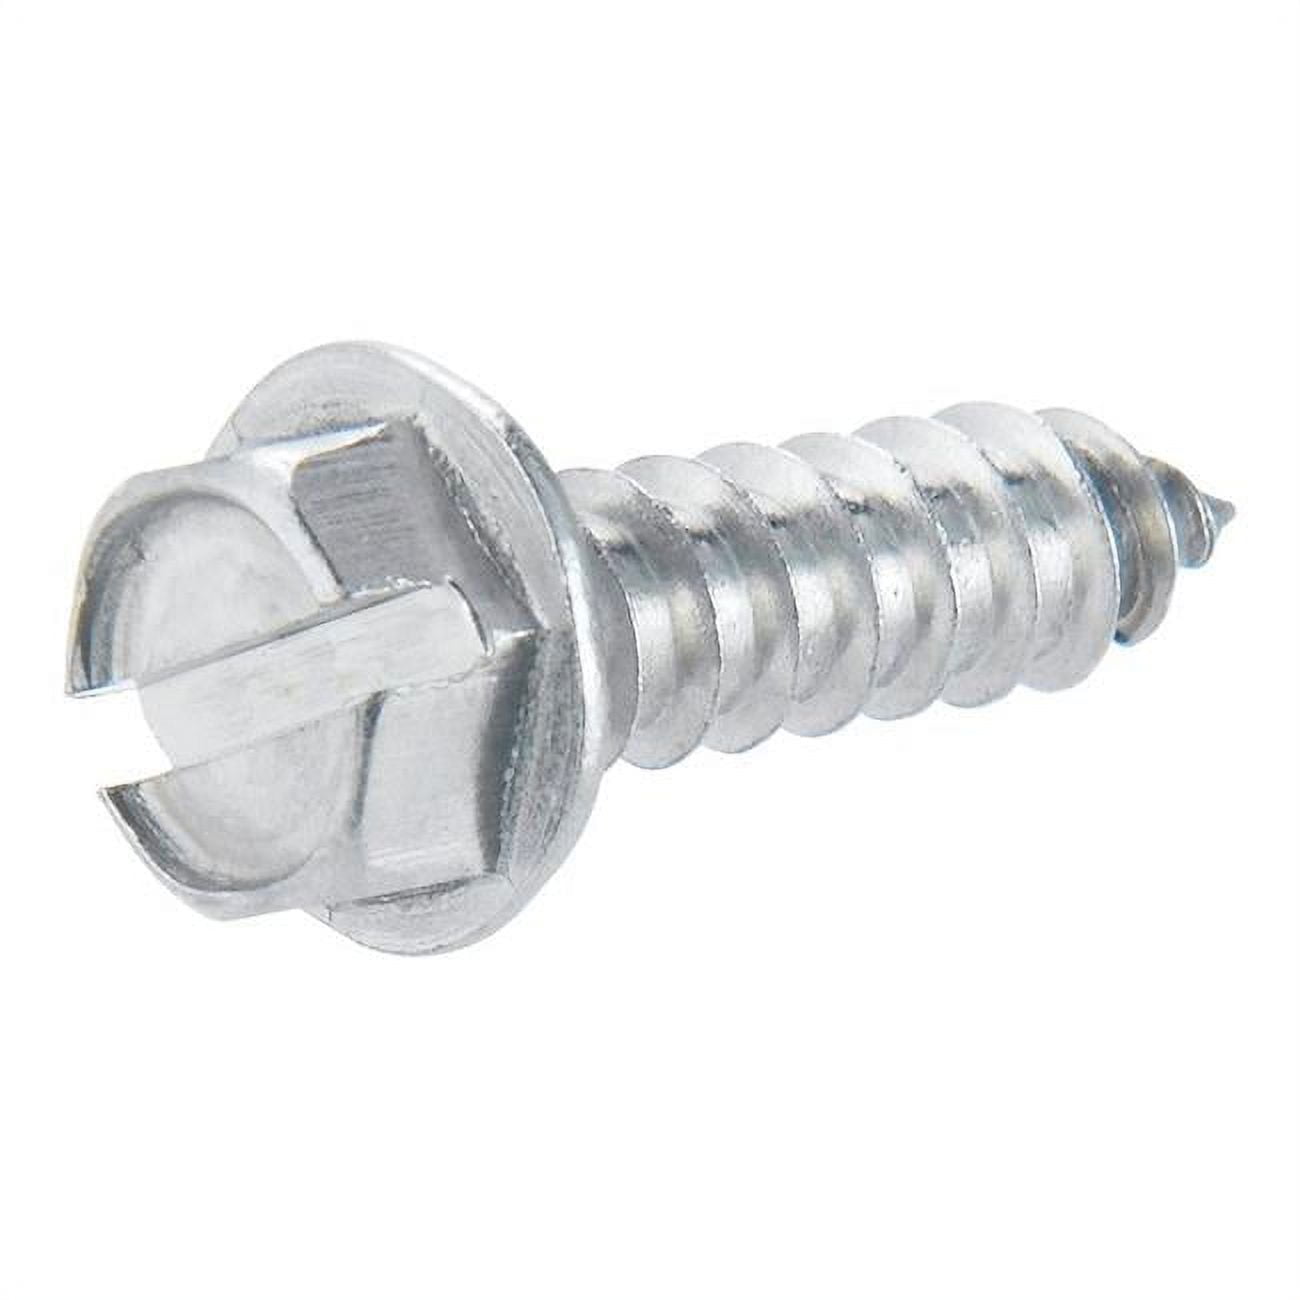 5007746 No. 8 X 1.5 In. Slotted Hex Head Steel Washer Roofing Screws, 1 Lbs - Pack Of 12